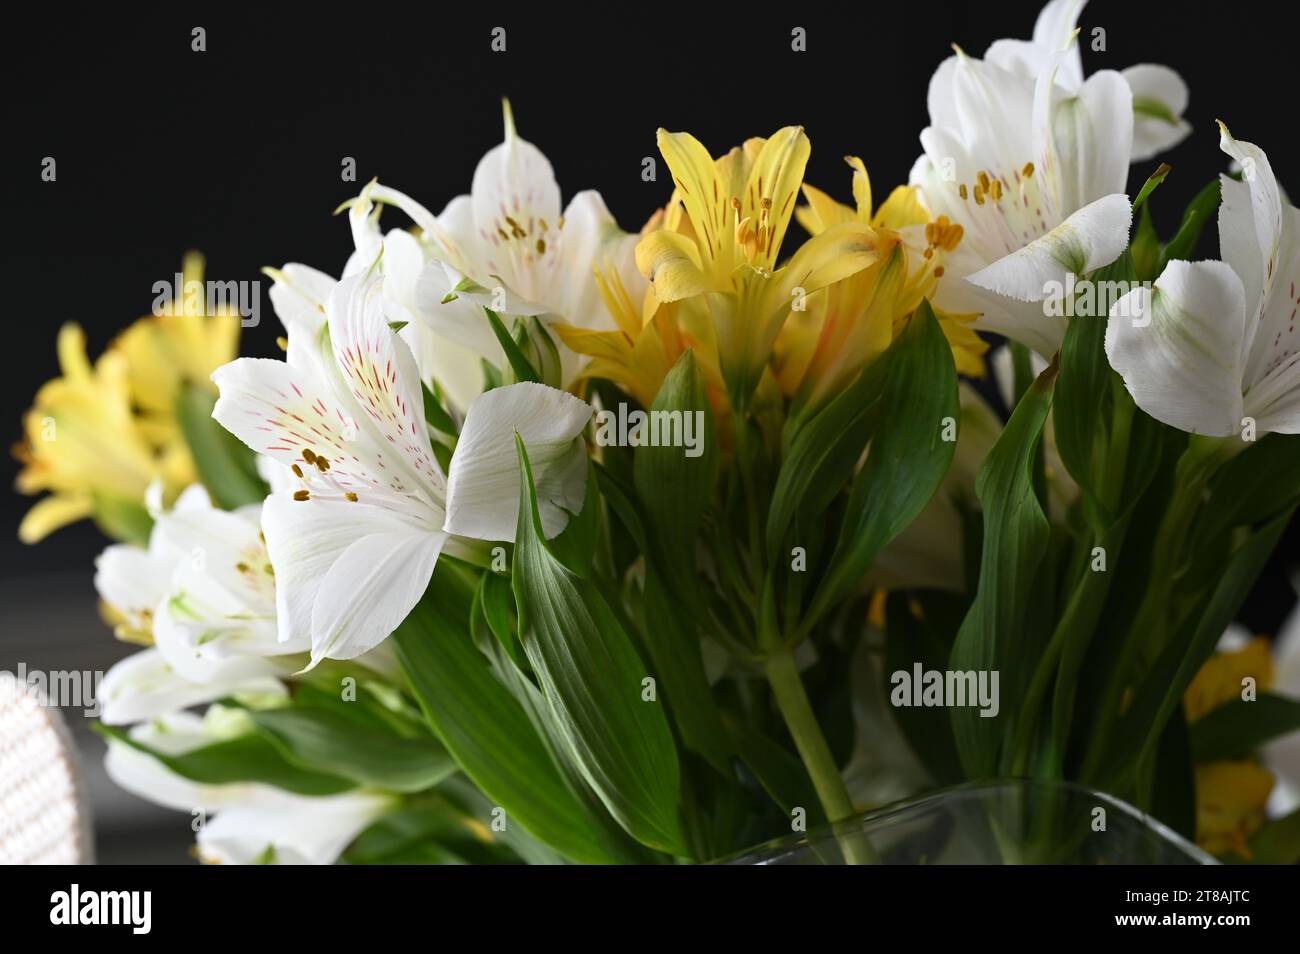 Colorful Alstroemeria of South American flowering plants Stock Photo